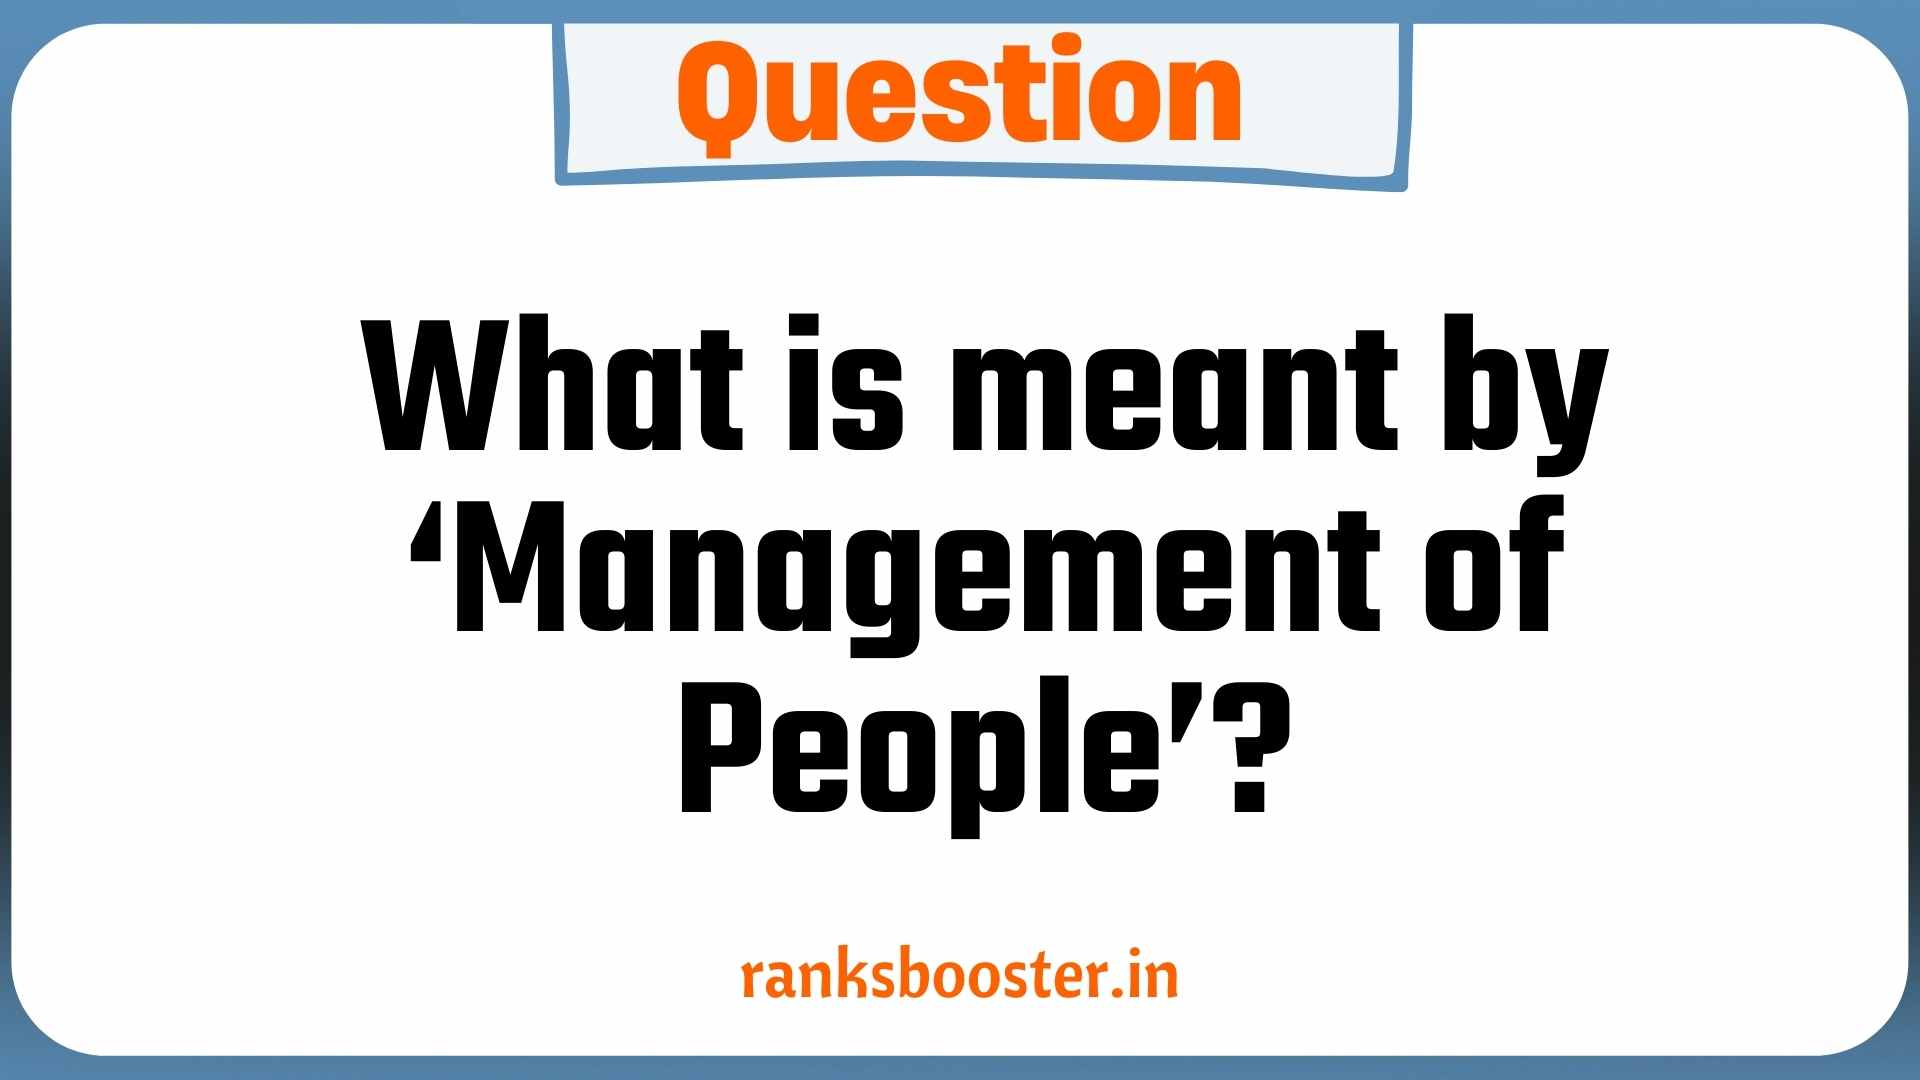 Question: What is meant by ‘Management of People’? [CBSE 2014]